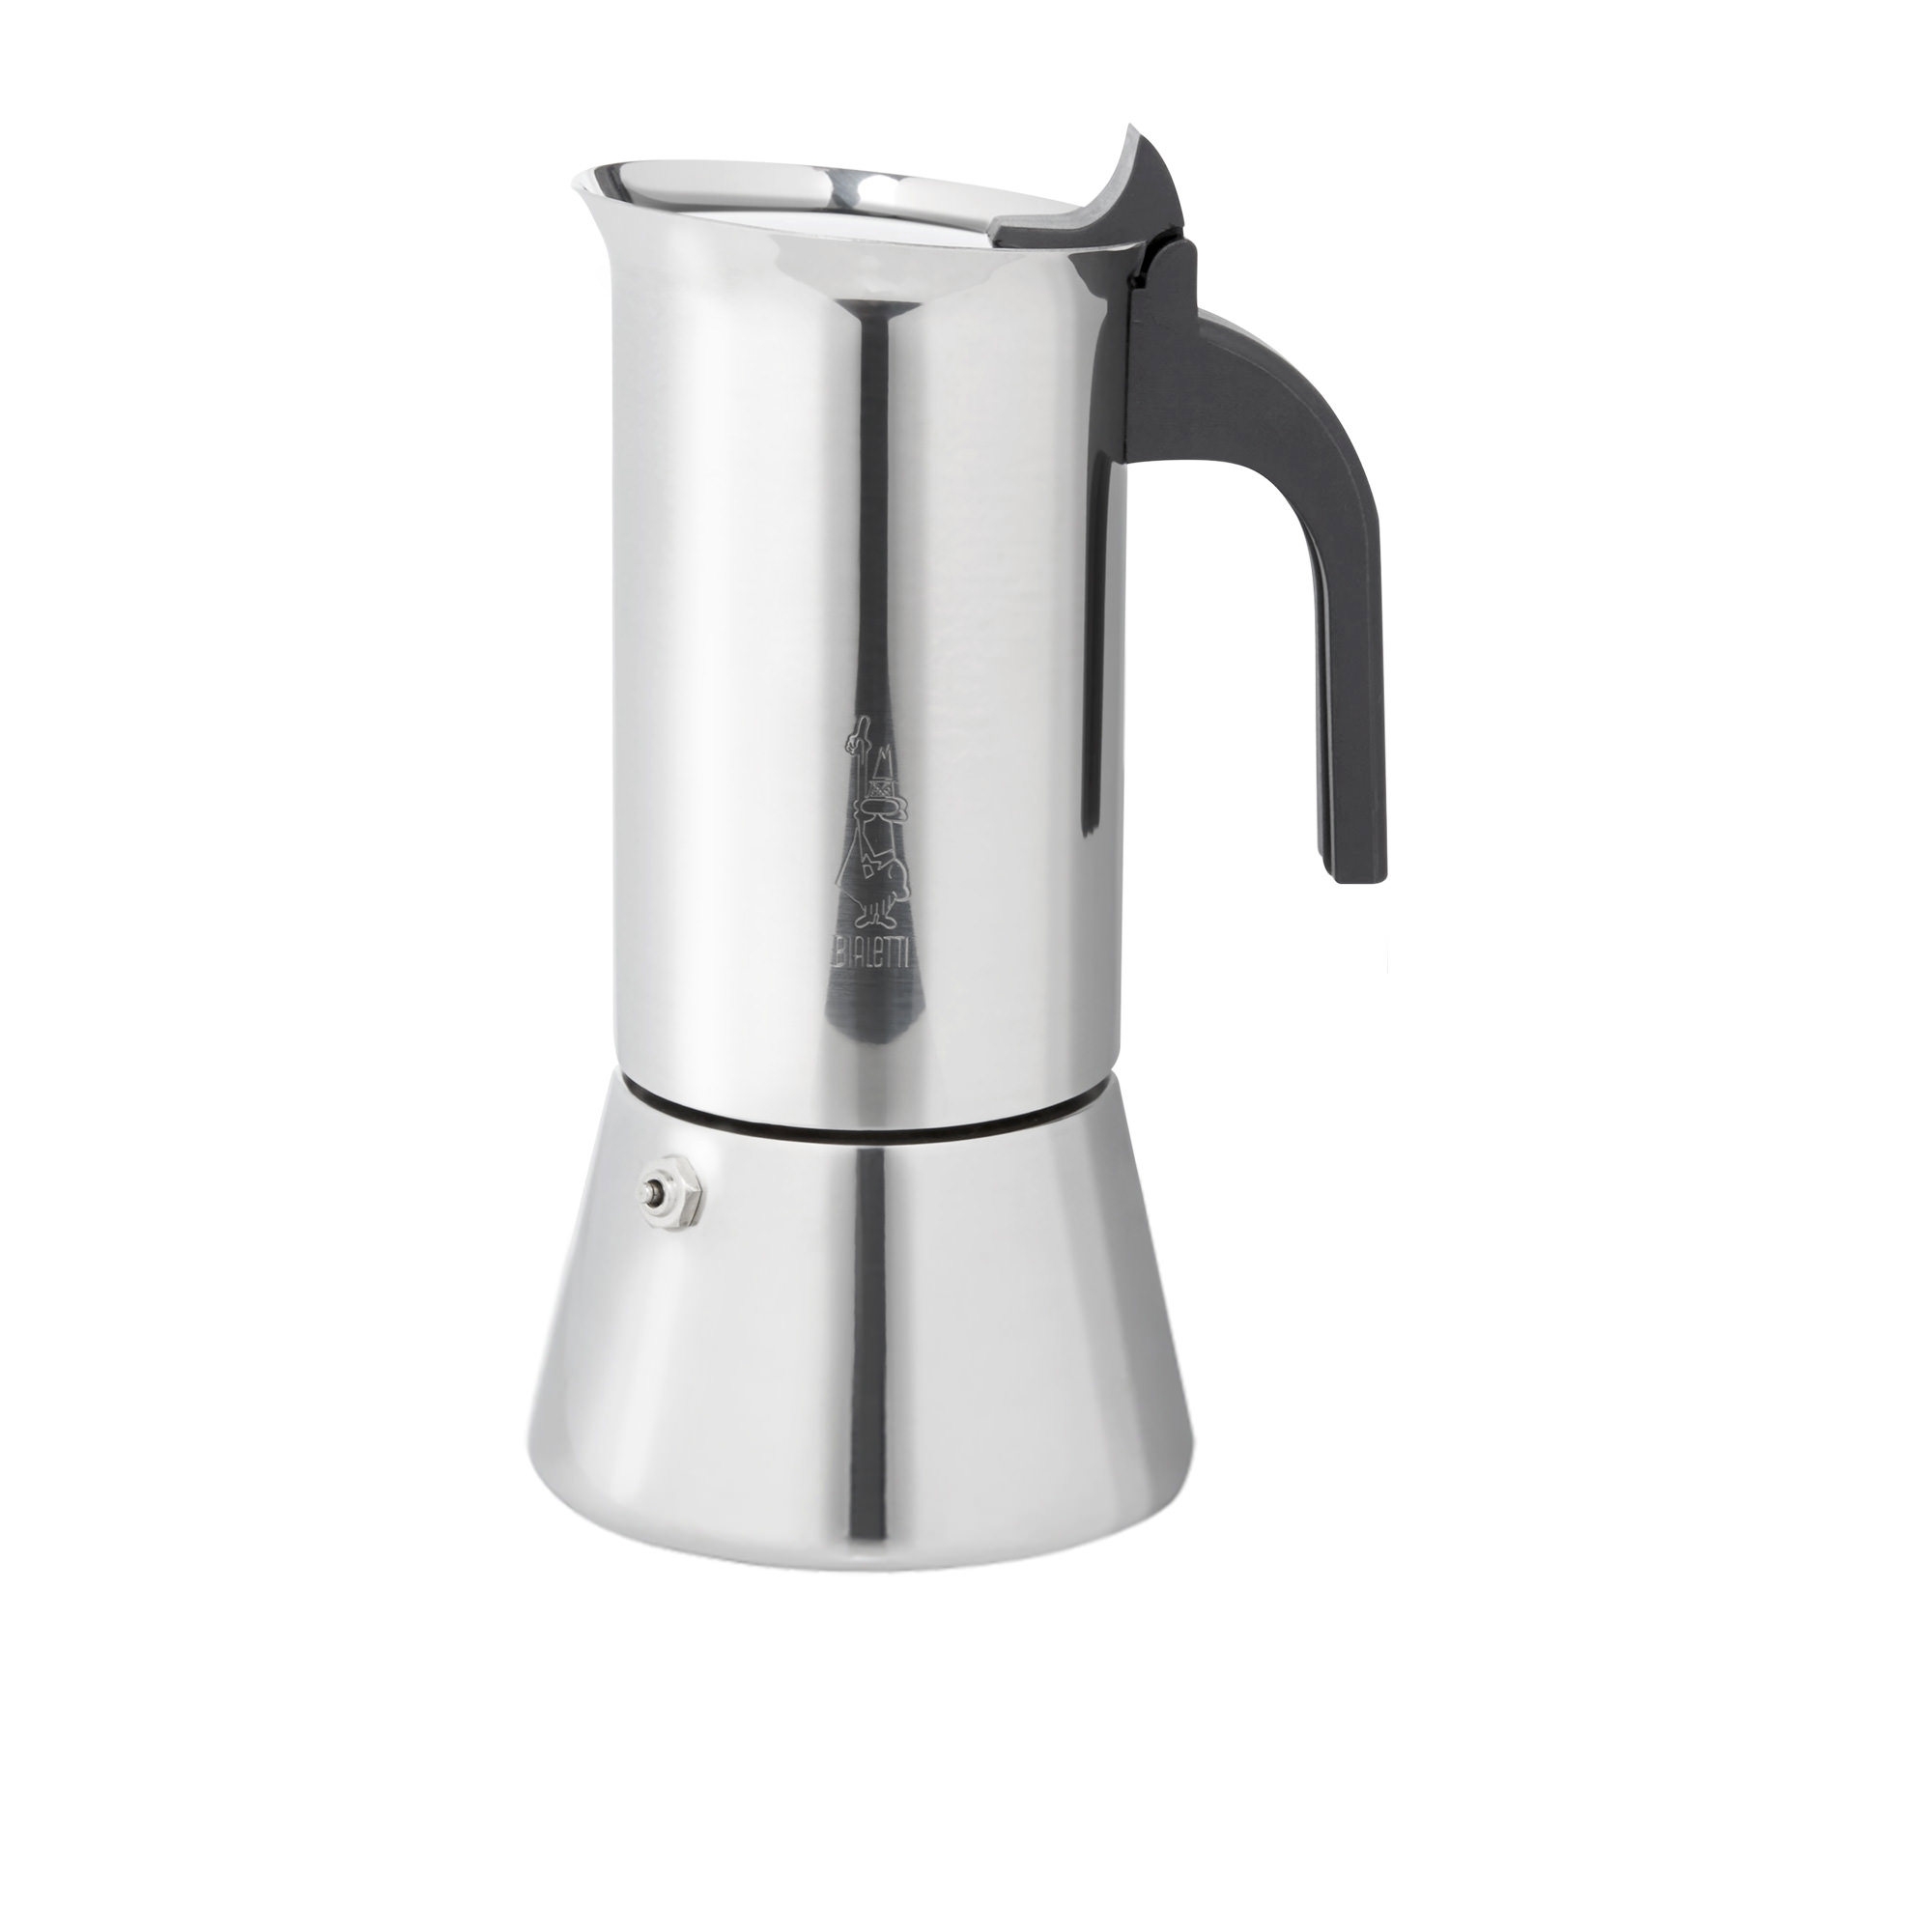 Bialetti Venus Stainless Steel Induction Espresso Maker 10 Cup Image 1